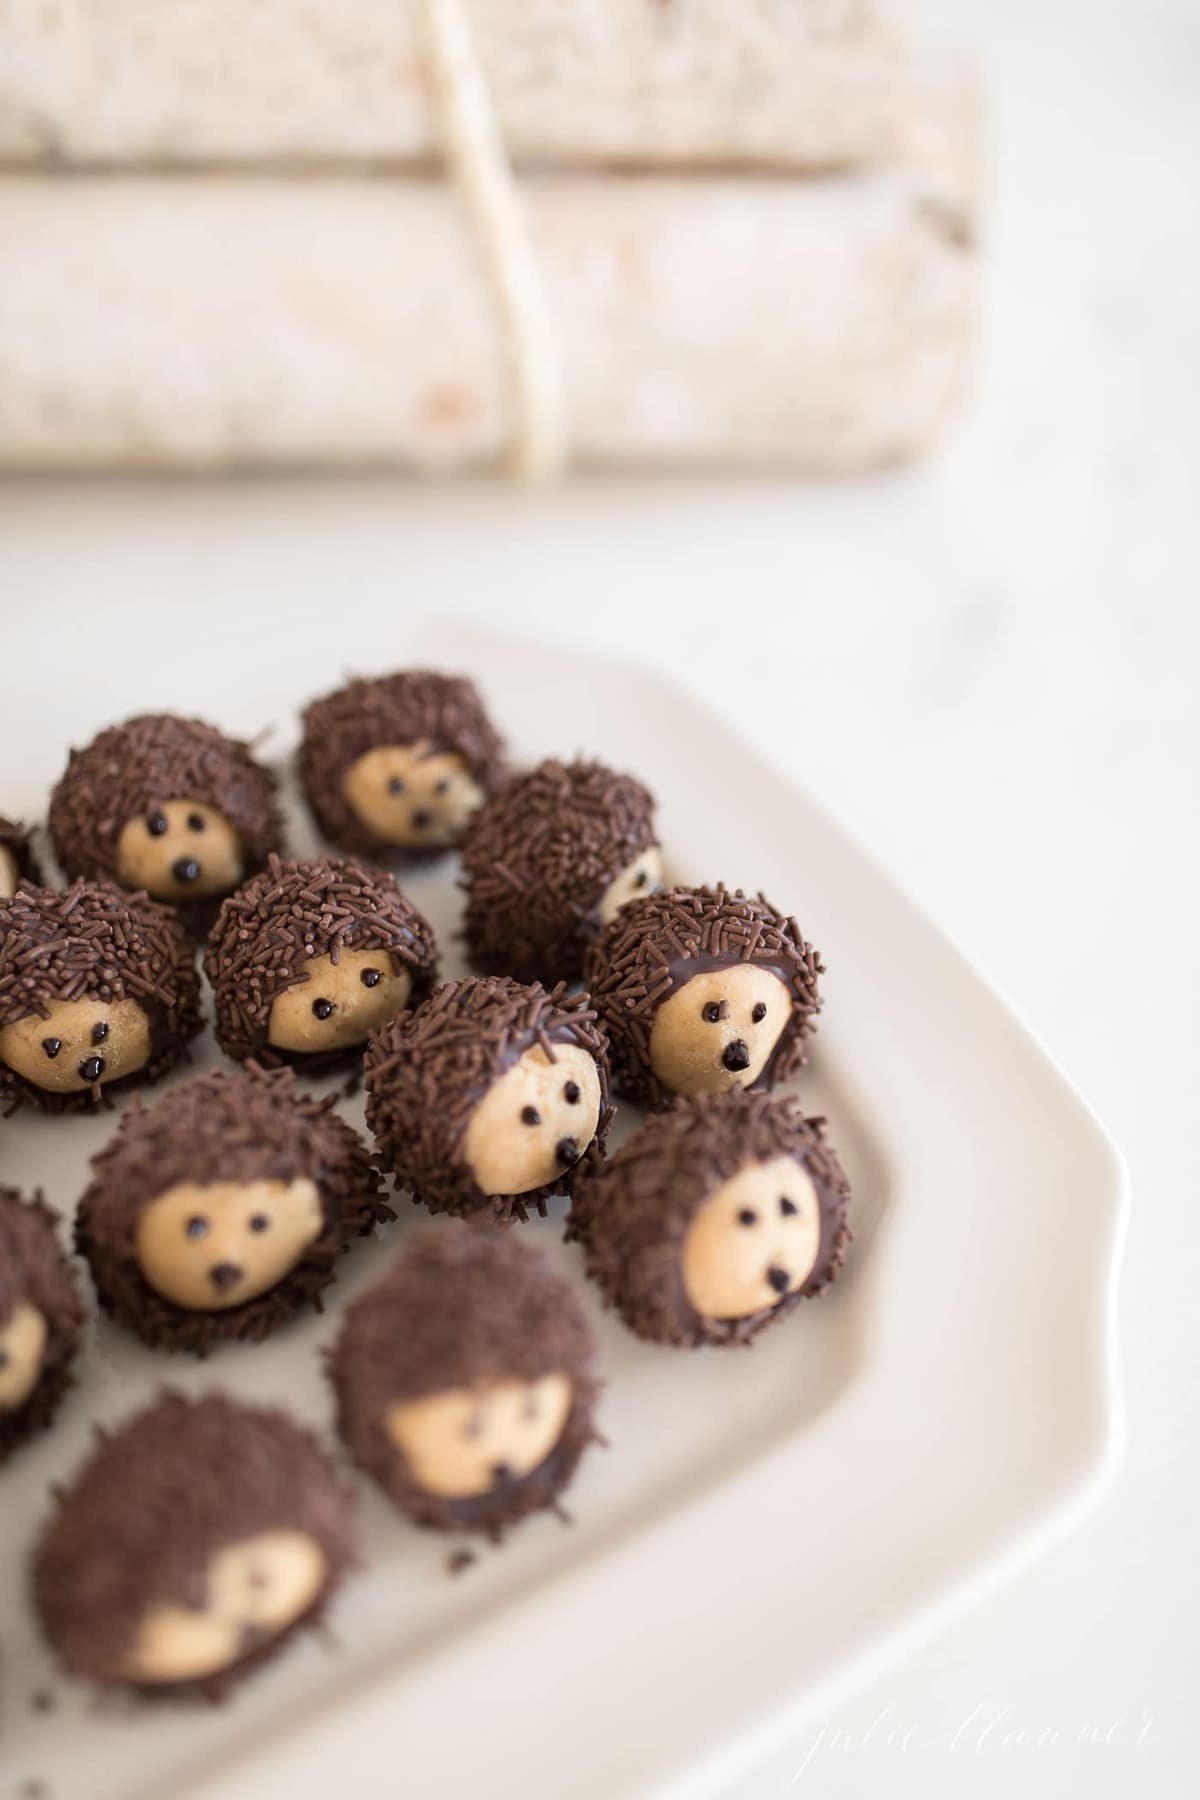 Chocolate Peanut Butter Balls decorated like hedgehogs